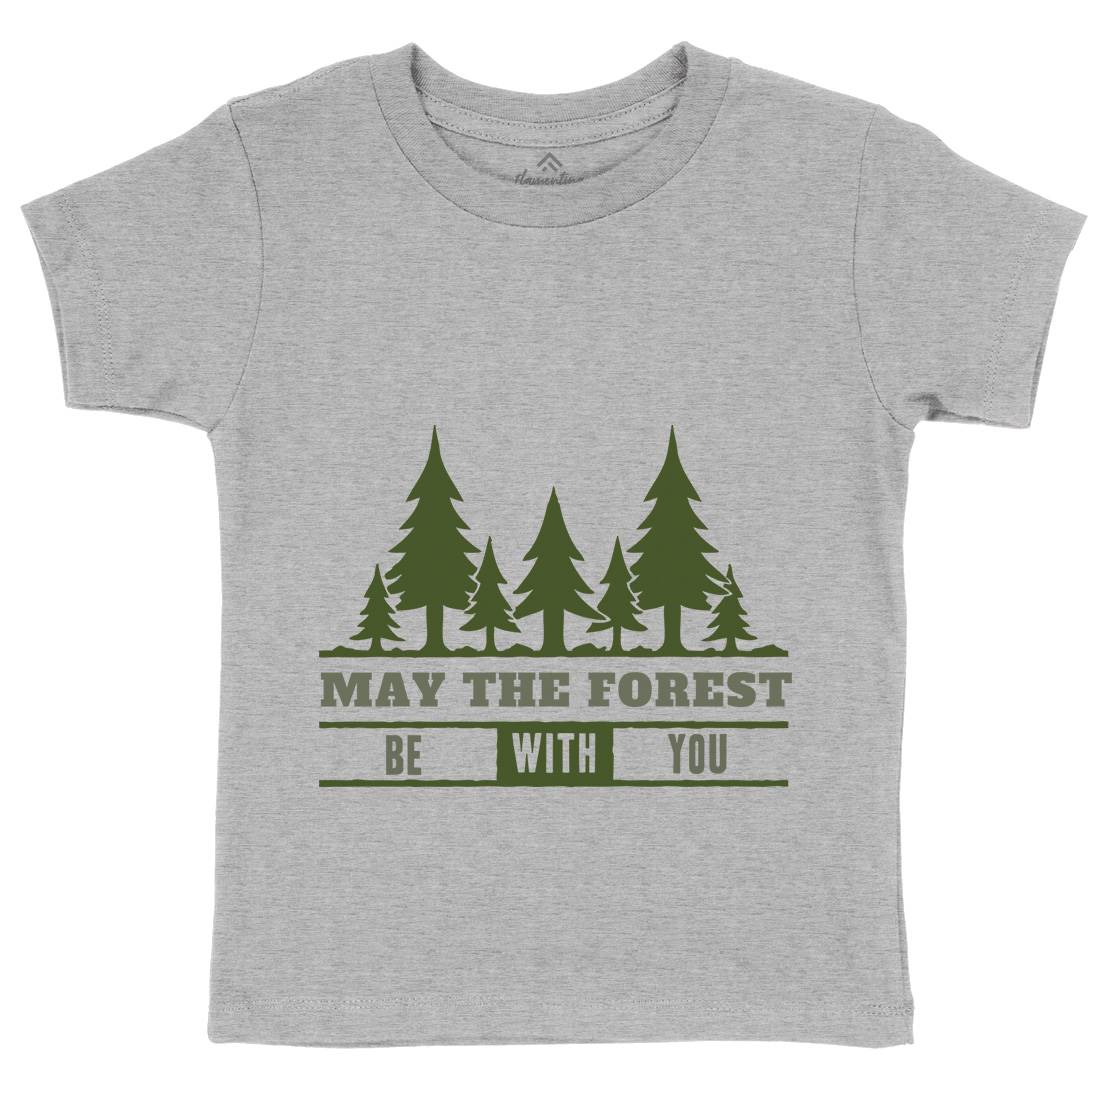 May The Forest Be With You Kids Organic Crew Neck T-Shirt Nature A345